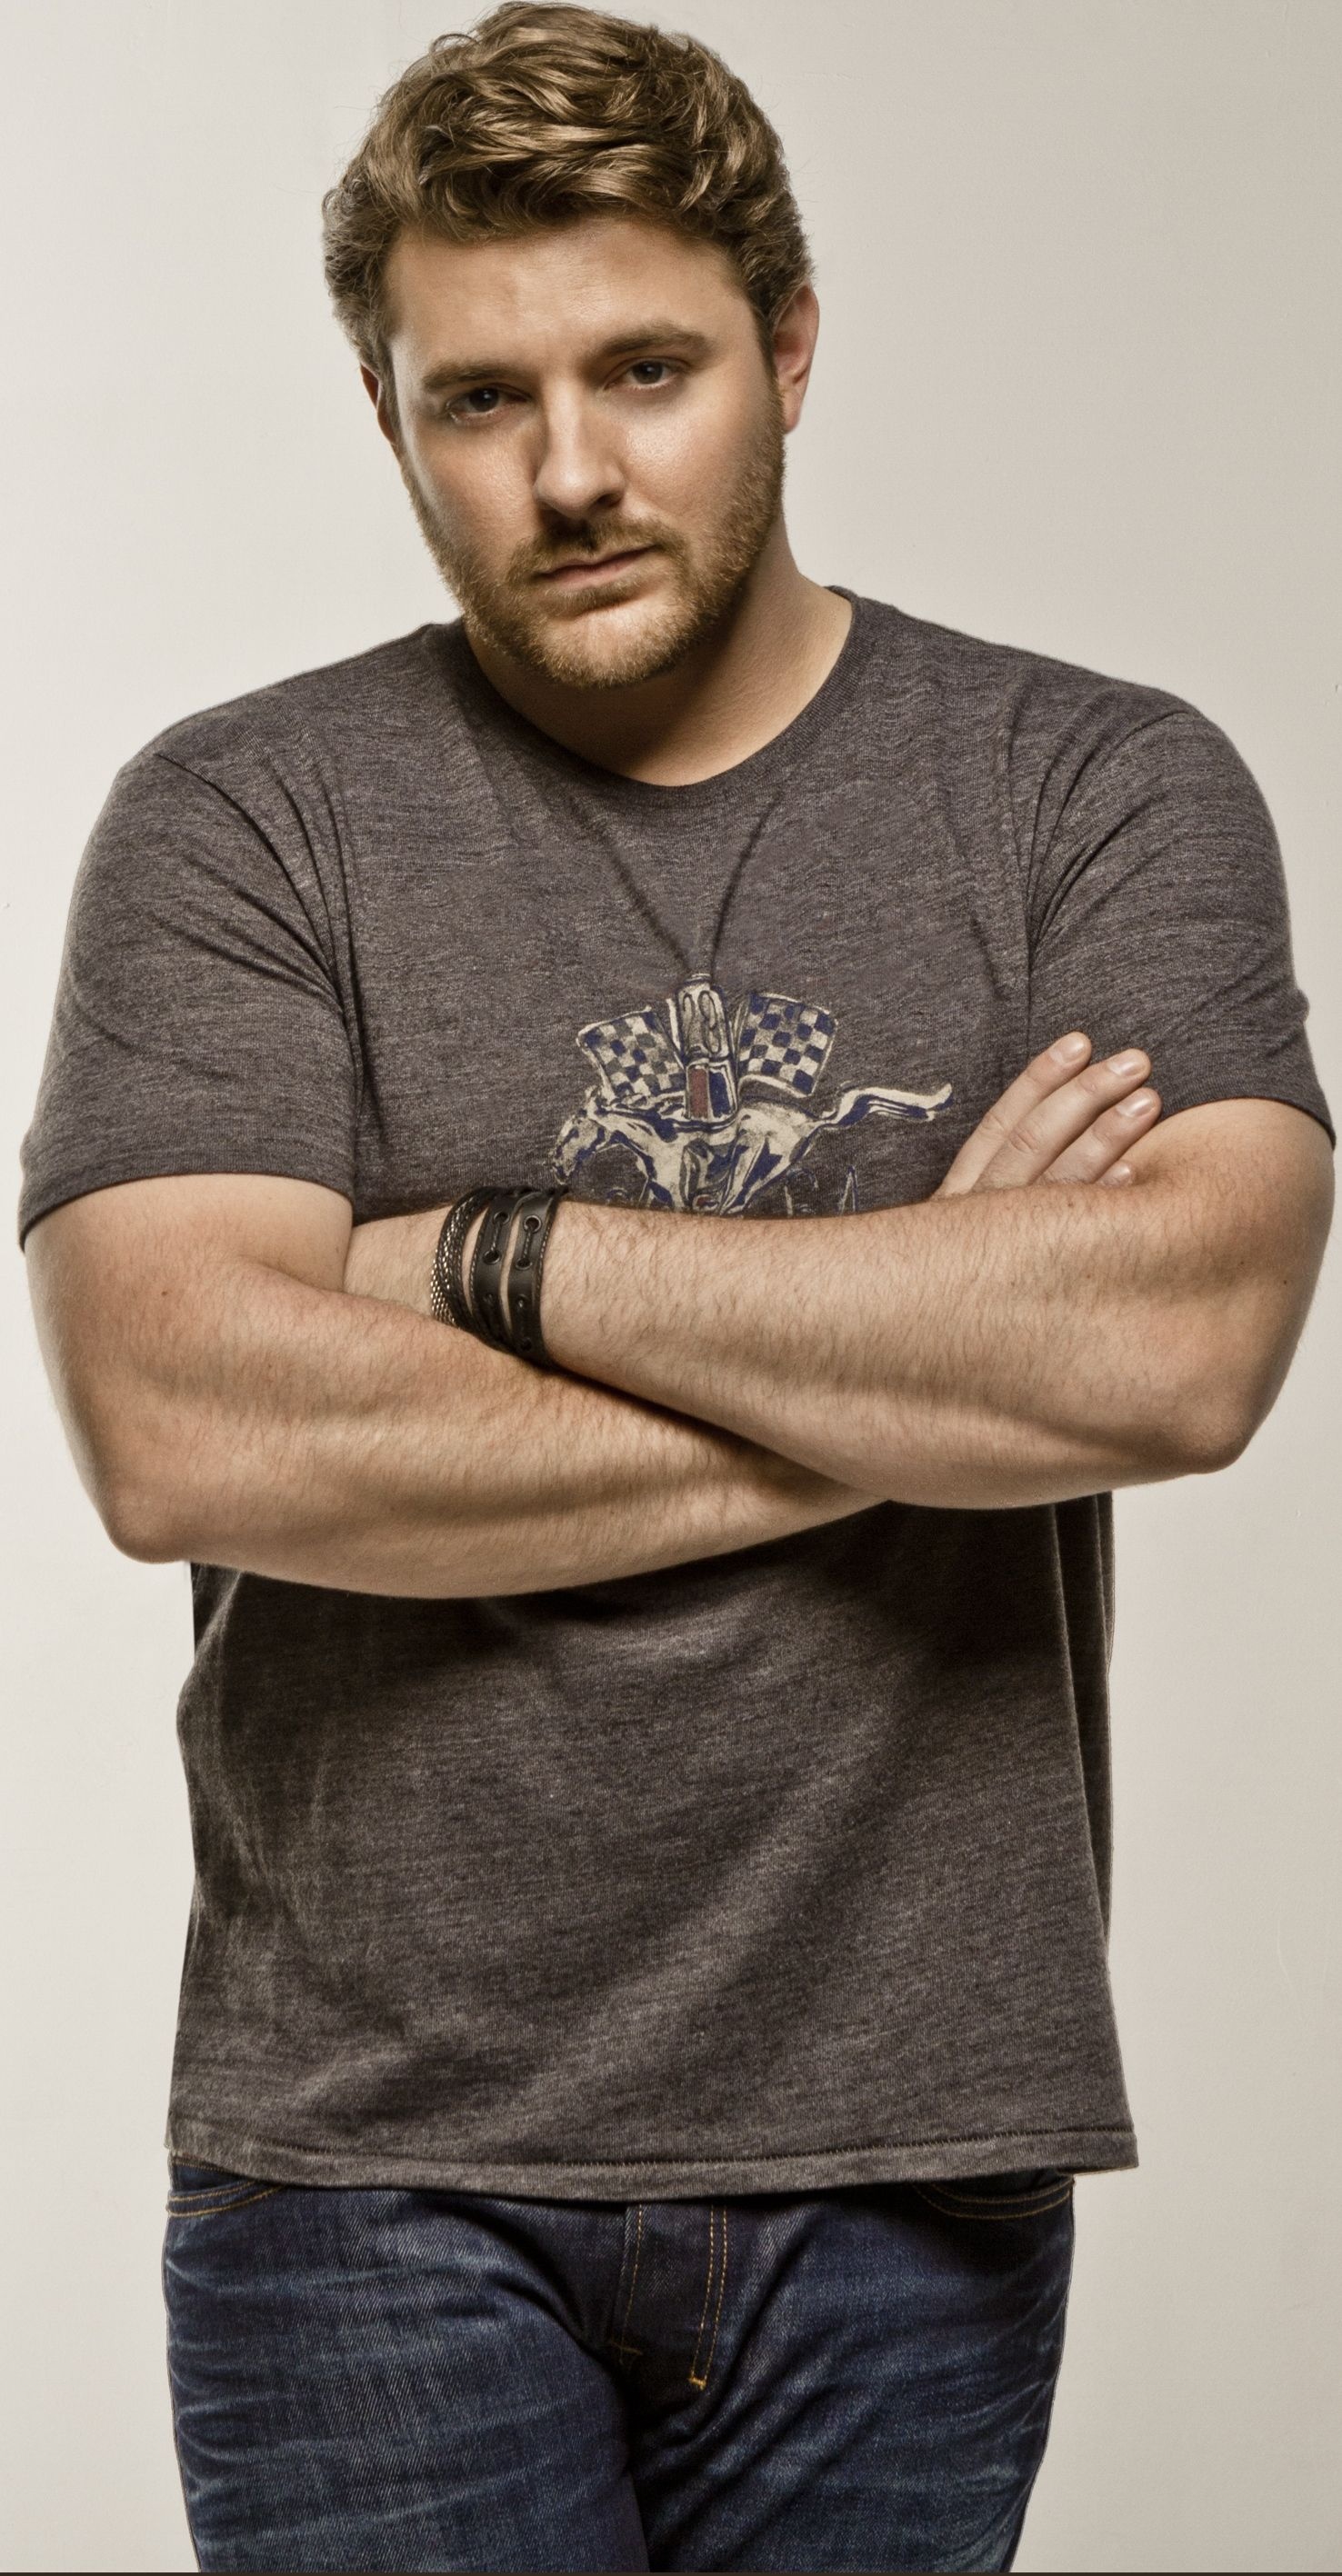 Chris Young, High-quality wallpapers, Music HQ, 4k pictures, 1480x2840 HD Handy